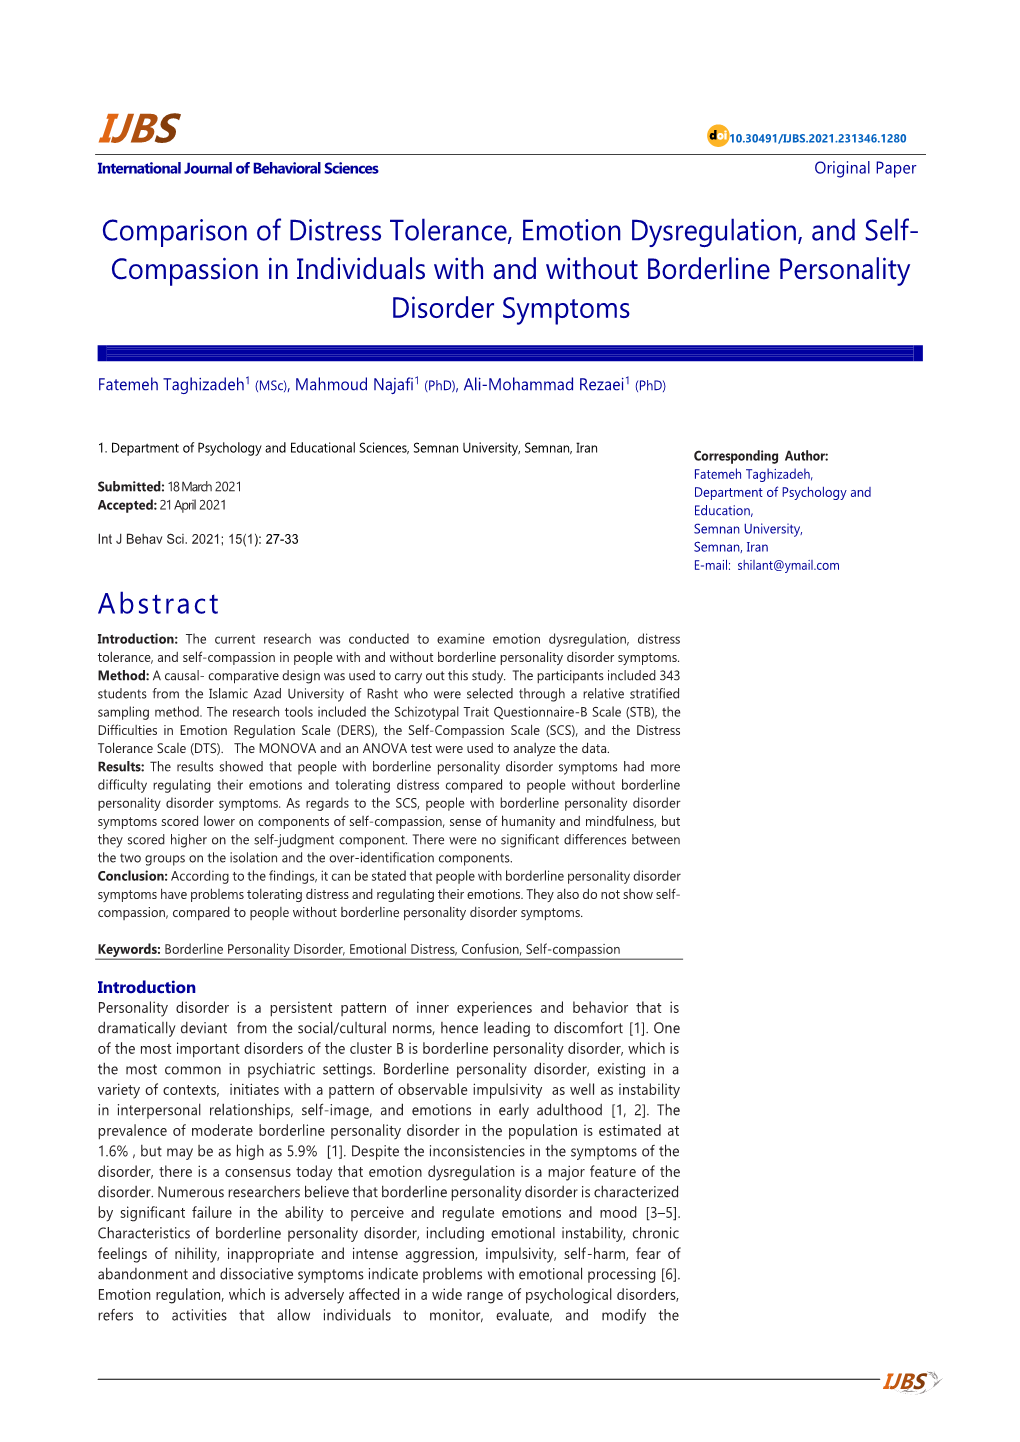 Comparison of Distress Tolerance, Emotion Dysregulation, and Self- Compassion in Individuals with and Without Borderline Personality Disorder Symptoms